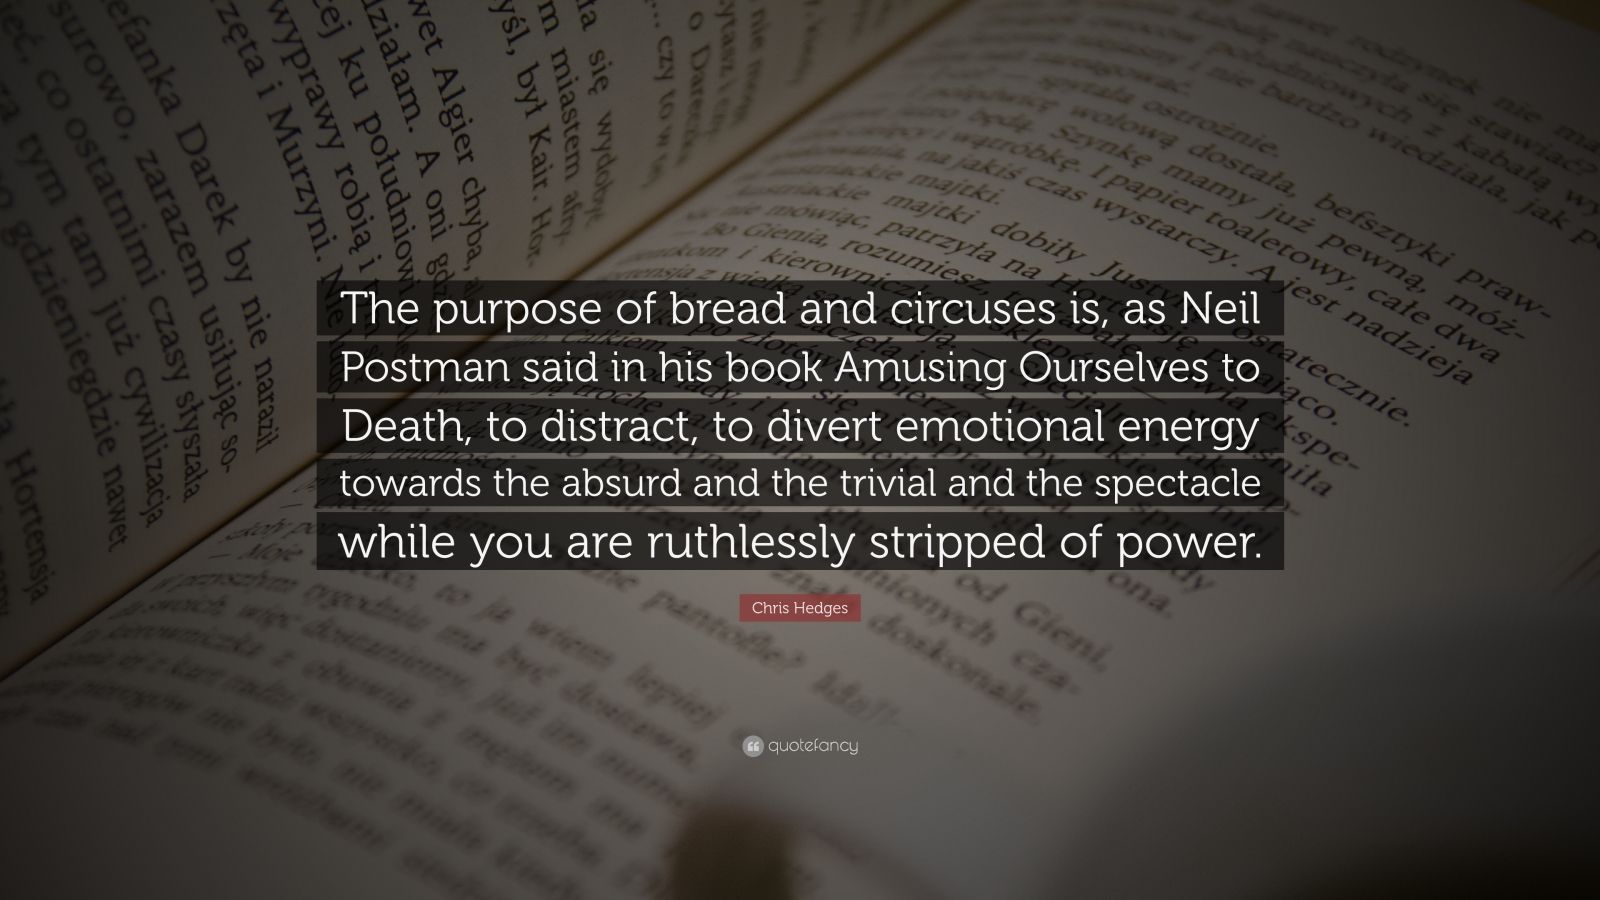 Chris Hedges Quote: “The purpose of bread and circuses is, as Neil